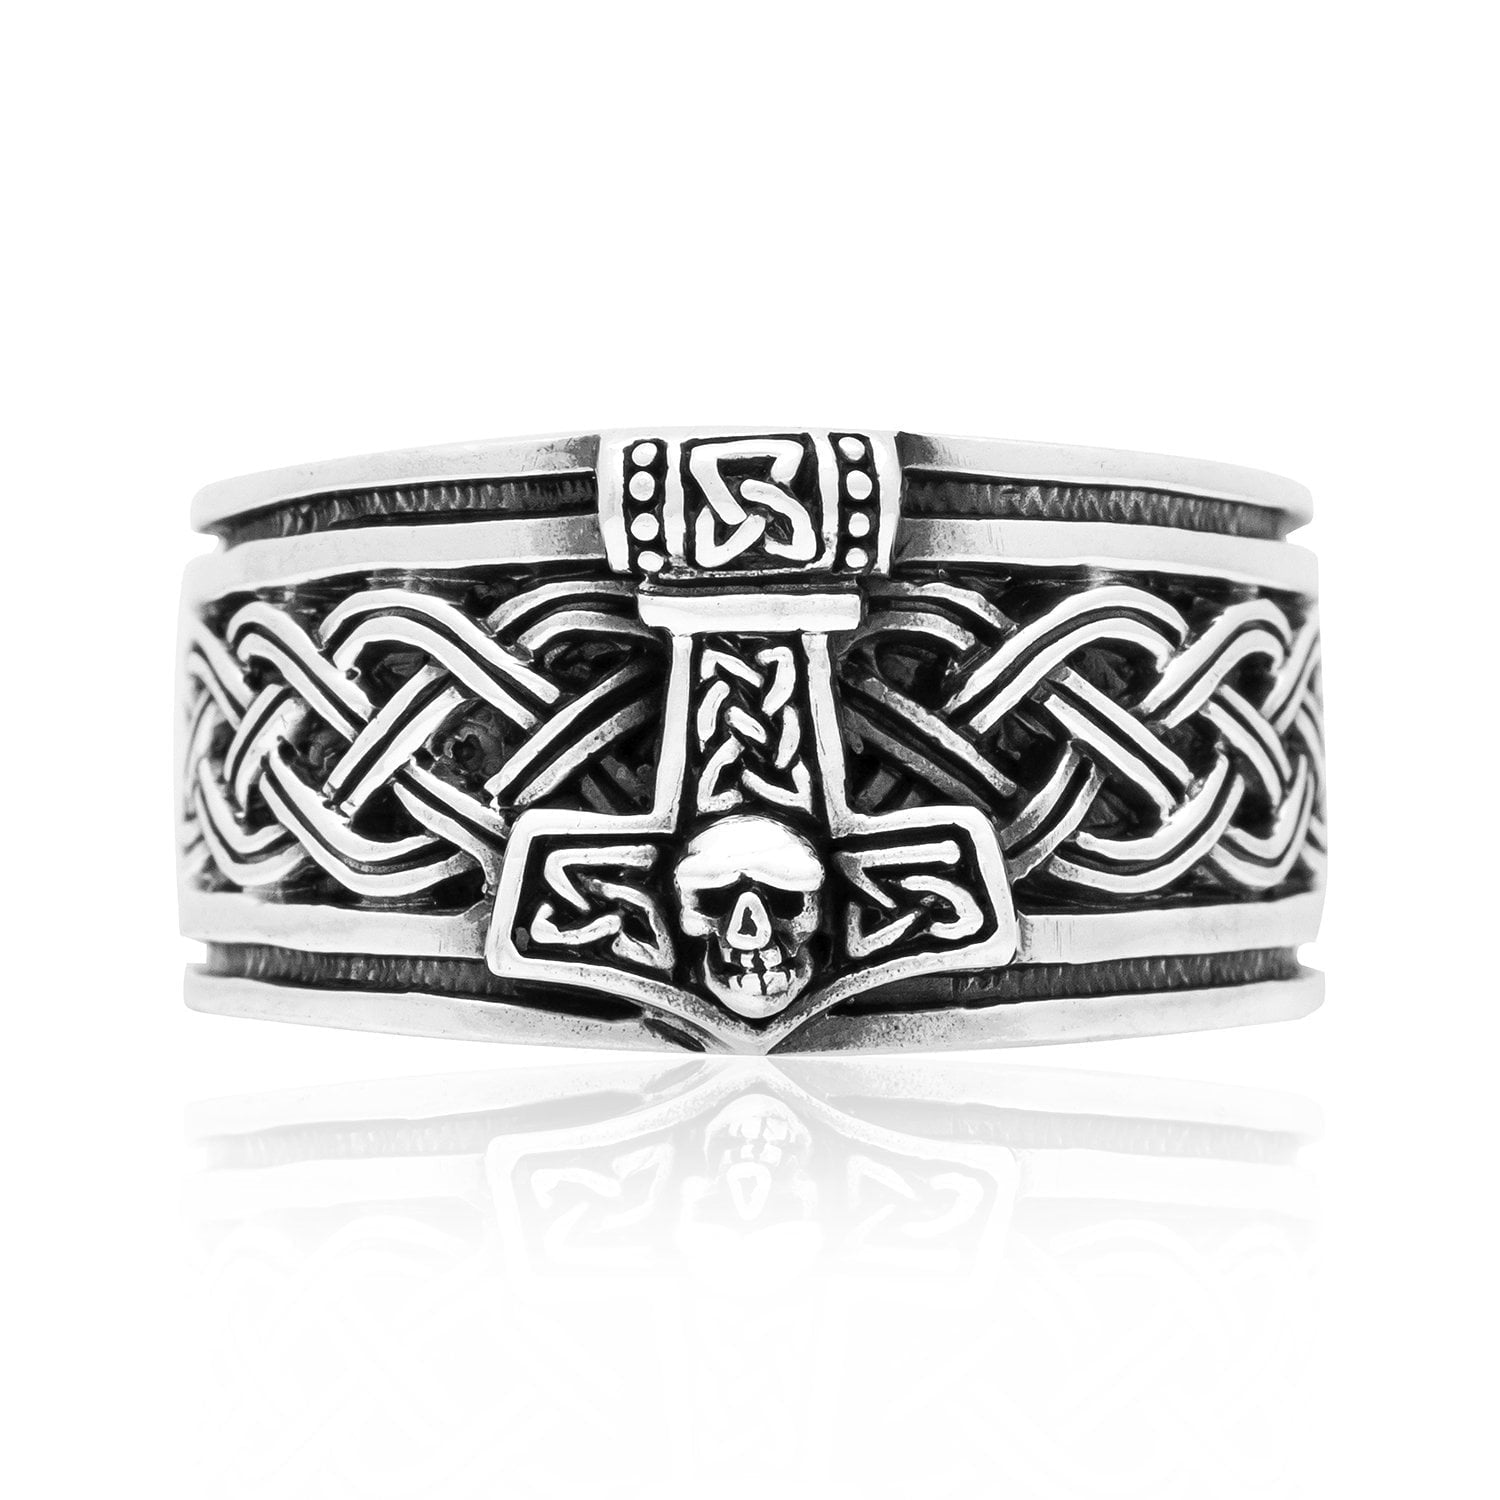 925 Sterling Silver Thor Hammer Band Ring with Celtic Motifs - SilverMania925